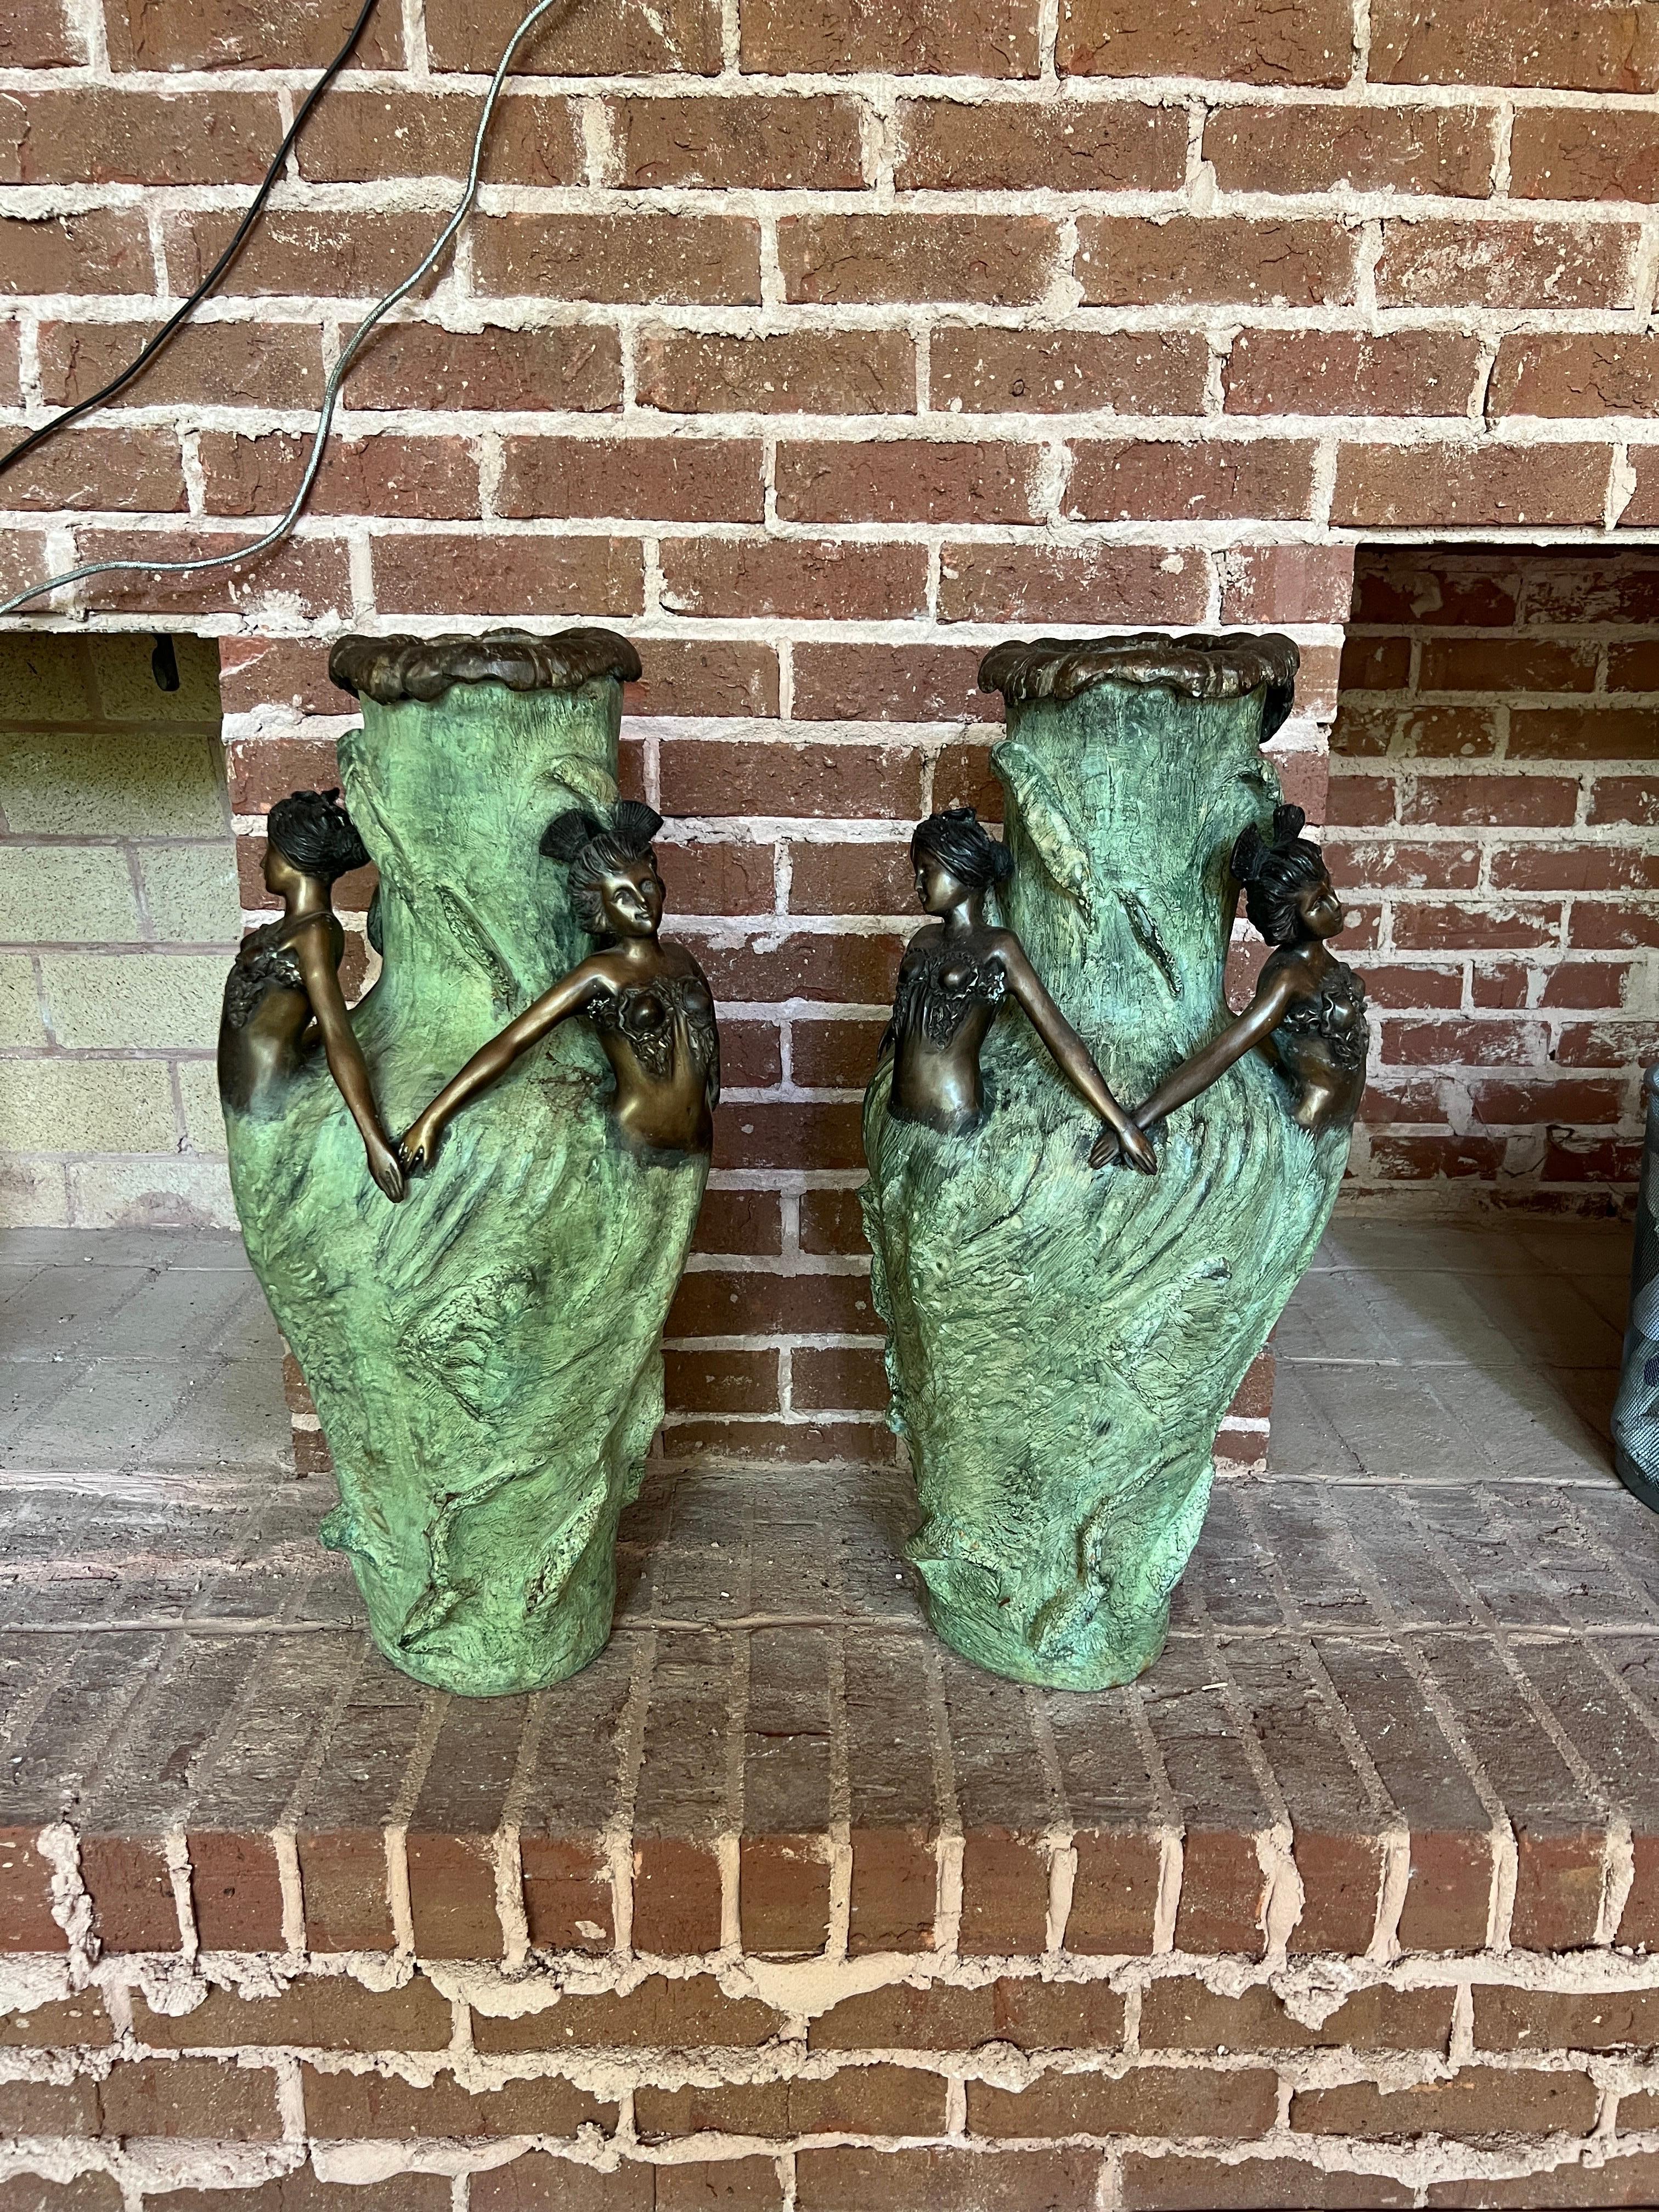 After Louis Chalon (French, 1866-1940).

These vases are large scale floor vases after the famous originals made by Louis Chalon titled 